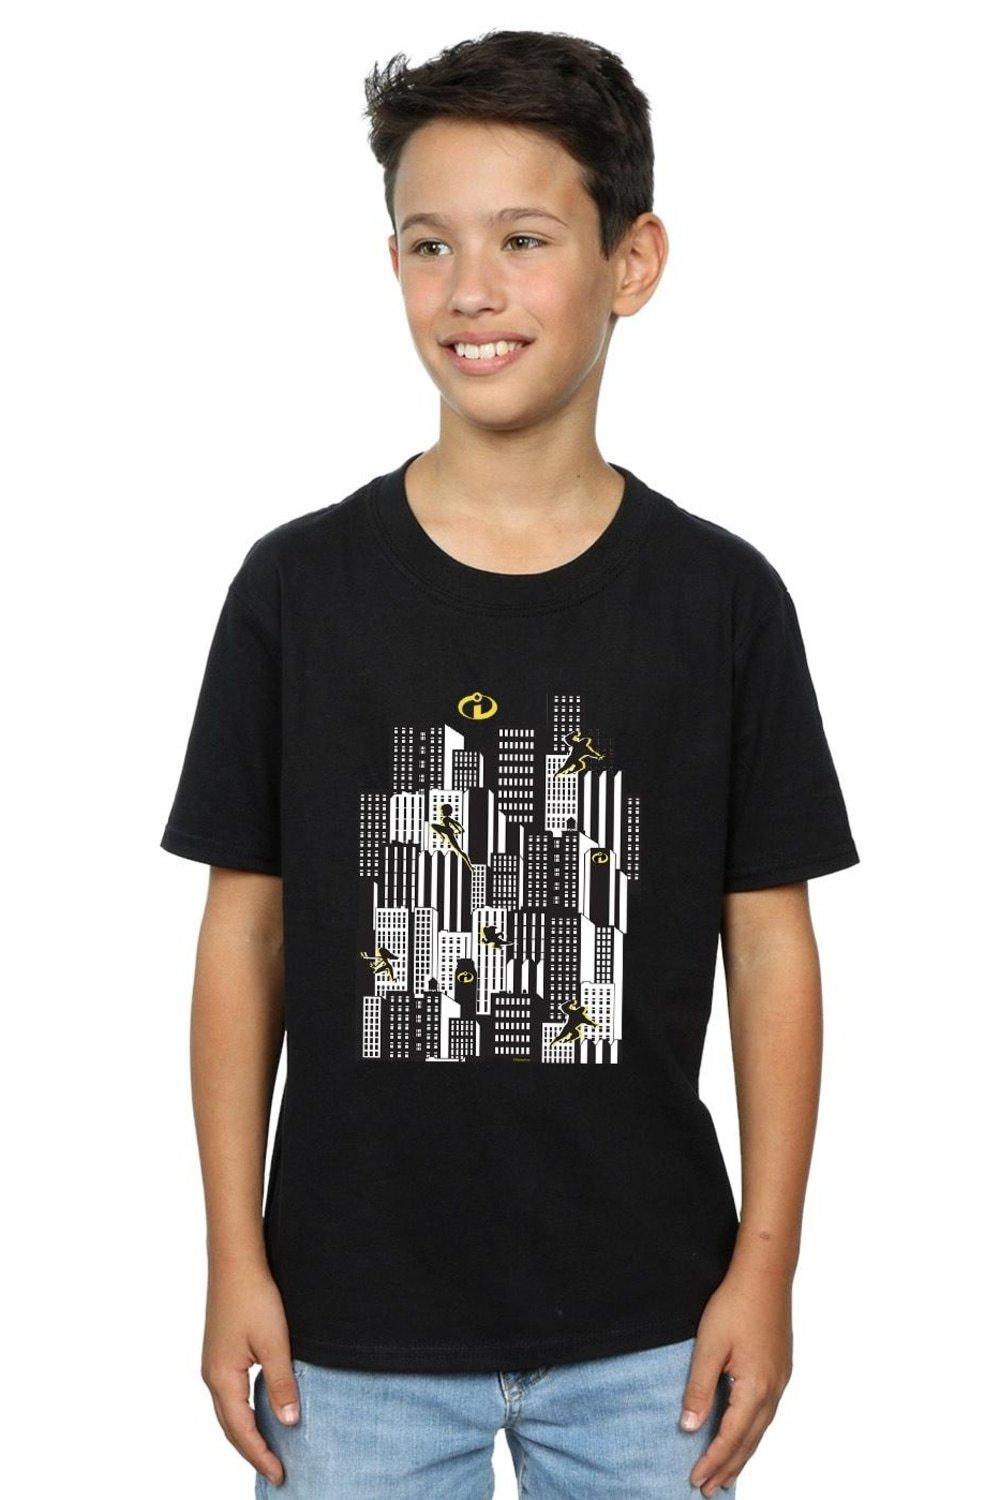 The Incredibles Skyline T-Shirt